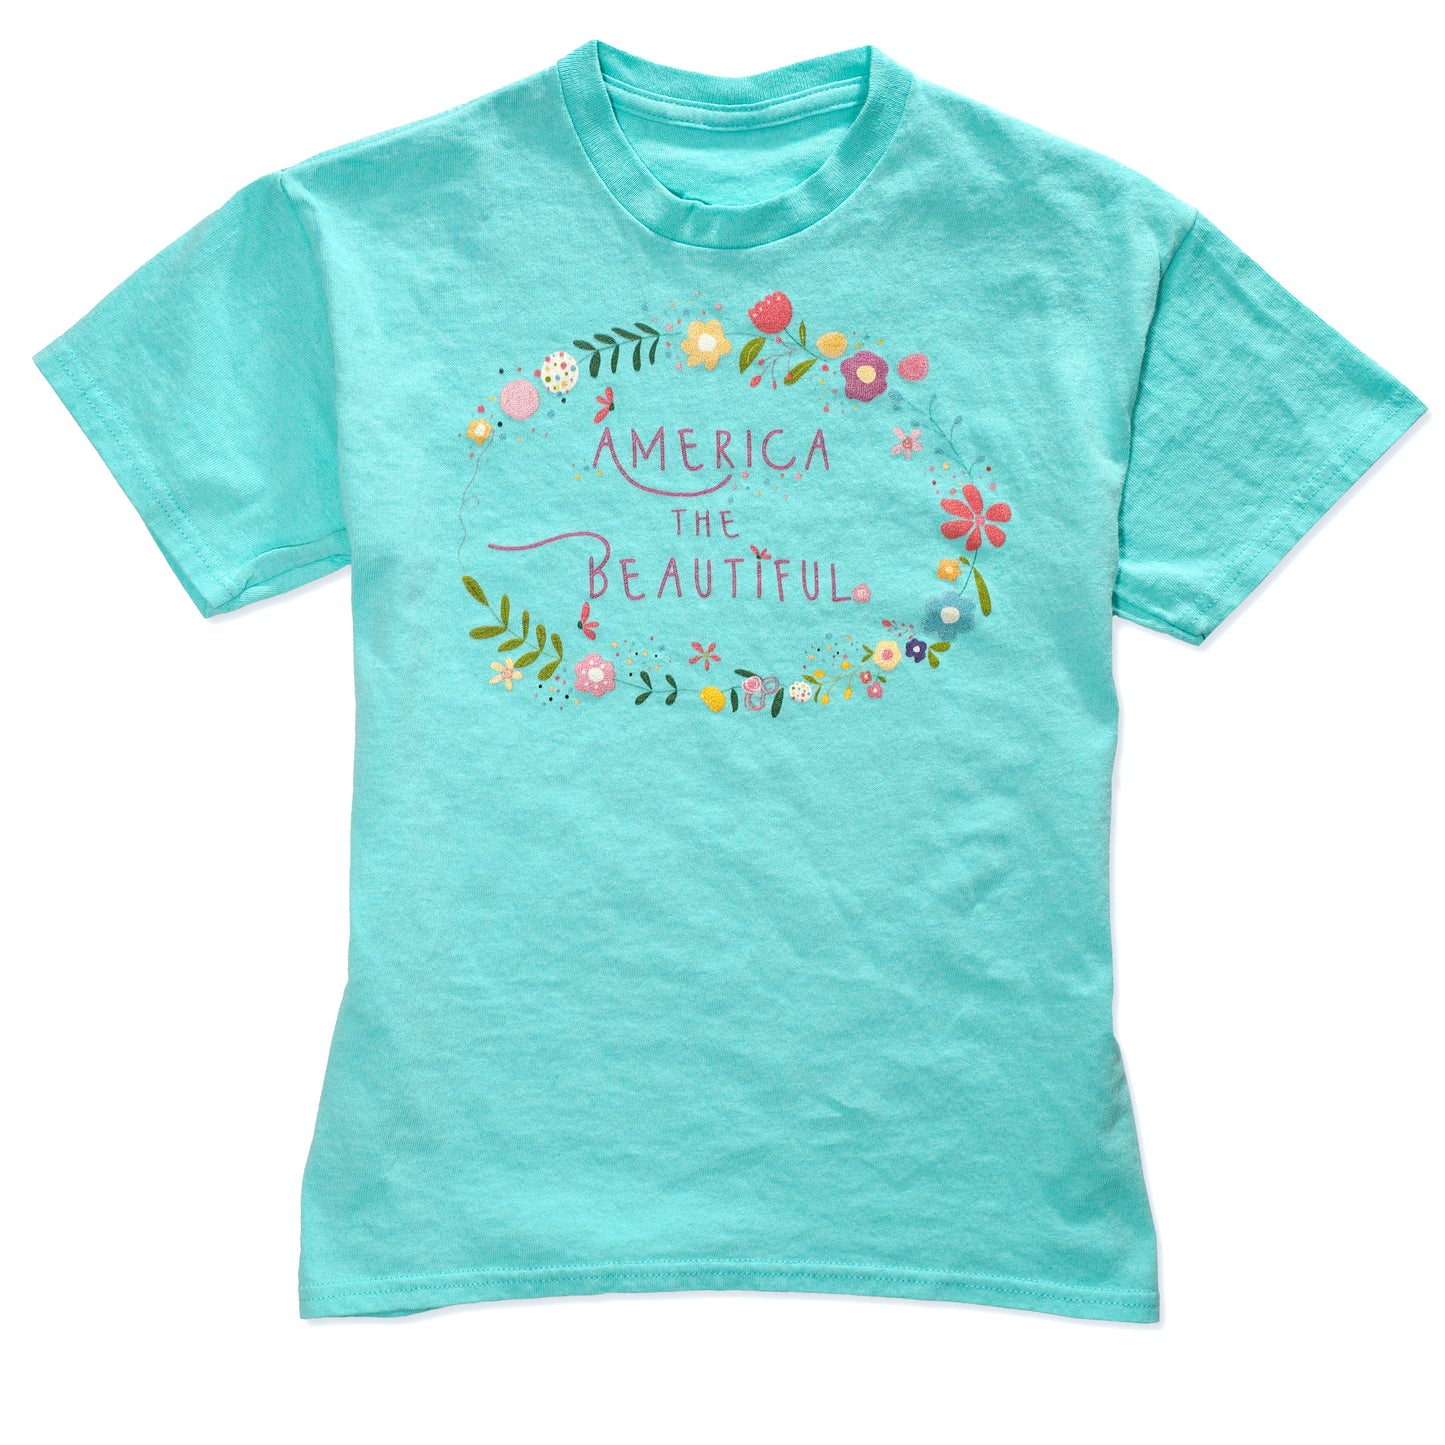 America The Beautiful Youth Girls Spring Flower Crown Cotton T-Shirt in Haledon